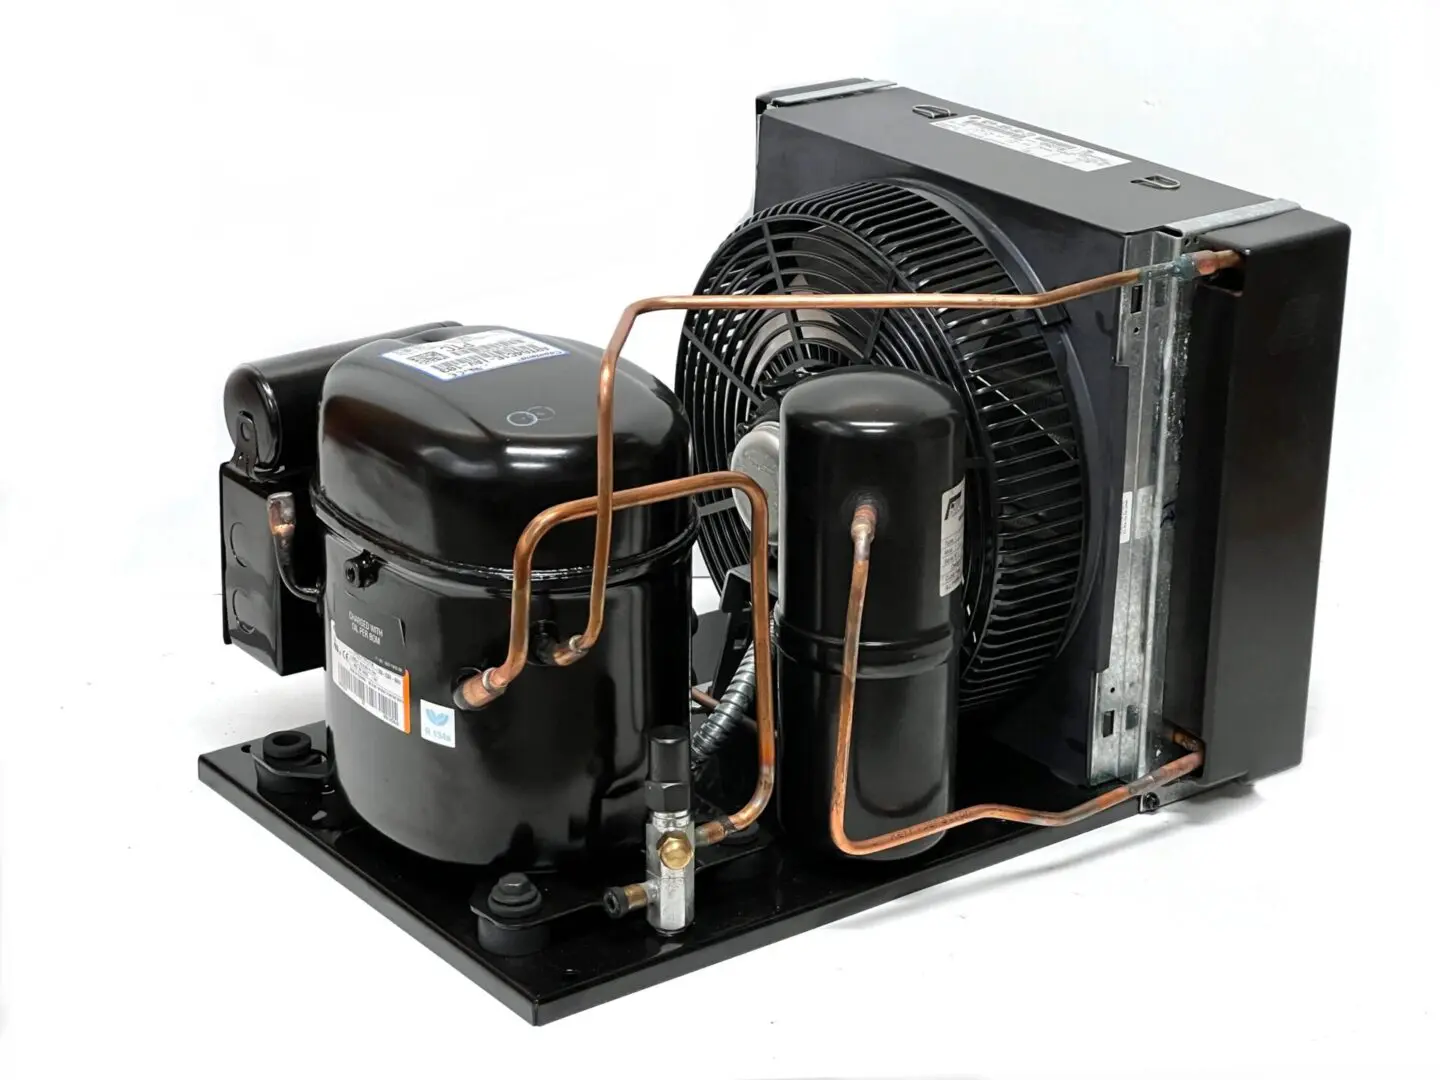 A compressor is connected to the air conditioner.